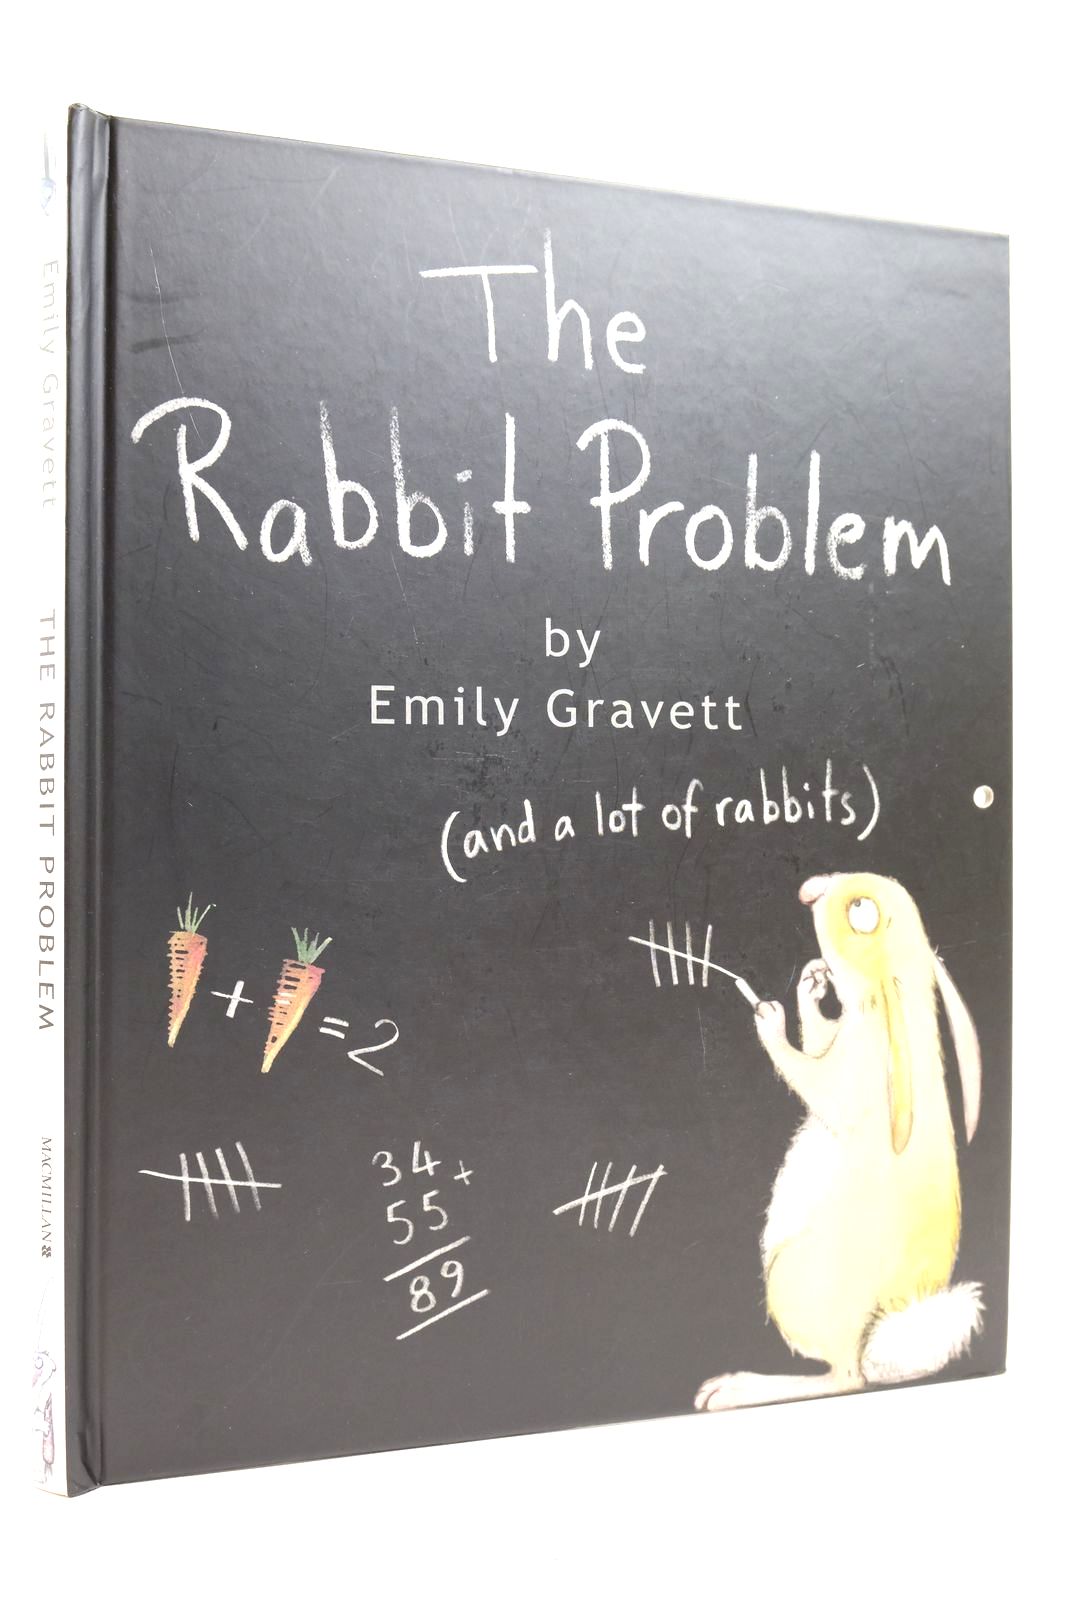 Photo of THE RABBIT PROBLEM written by Gravett, Emily illustrated by Gravett, Emily published by Macmillan Children's Books (STOCK CODE: 2140319)  for sale by Stella & Rose's Books